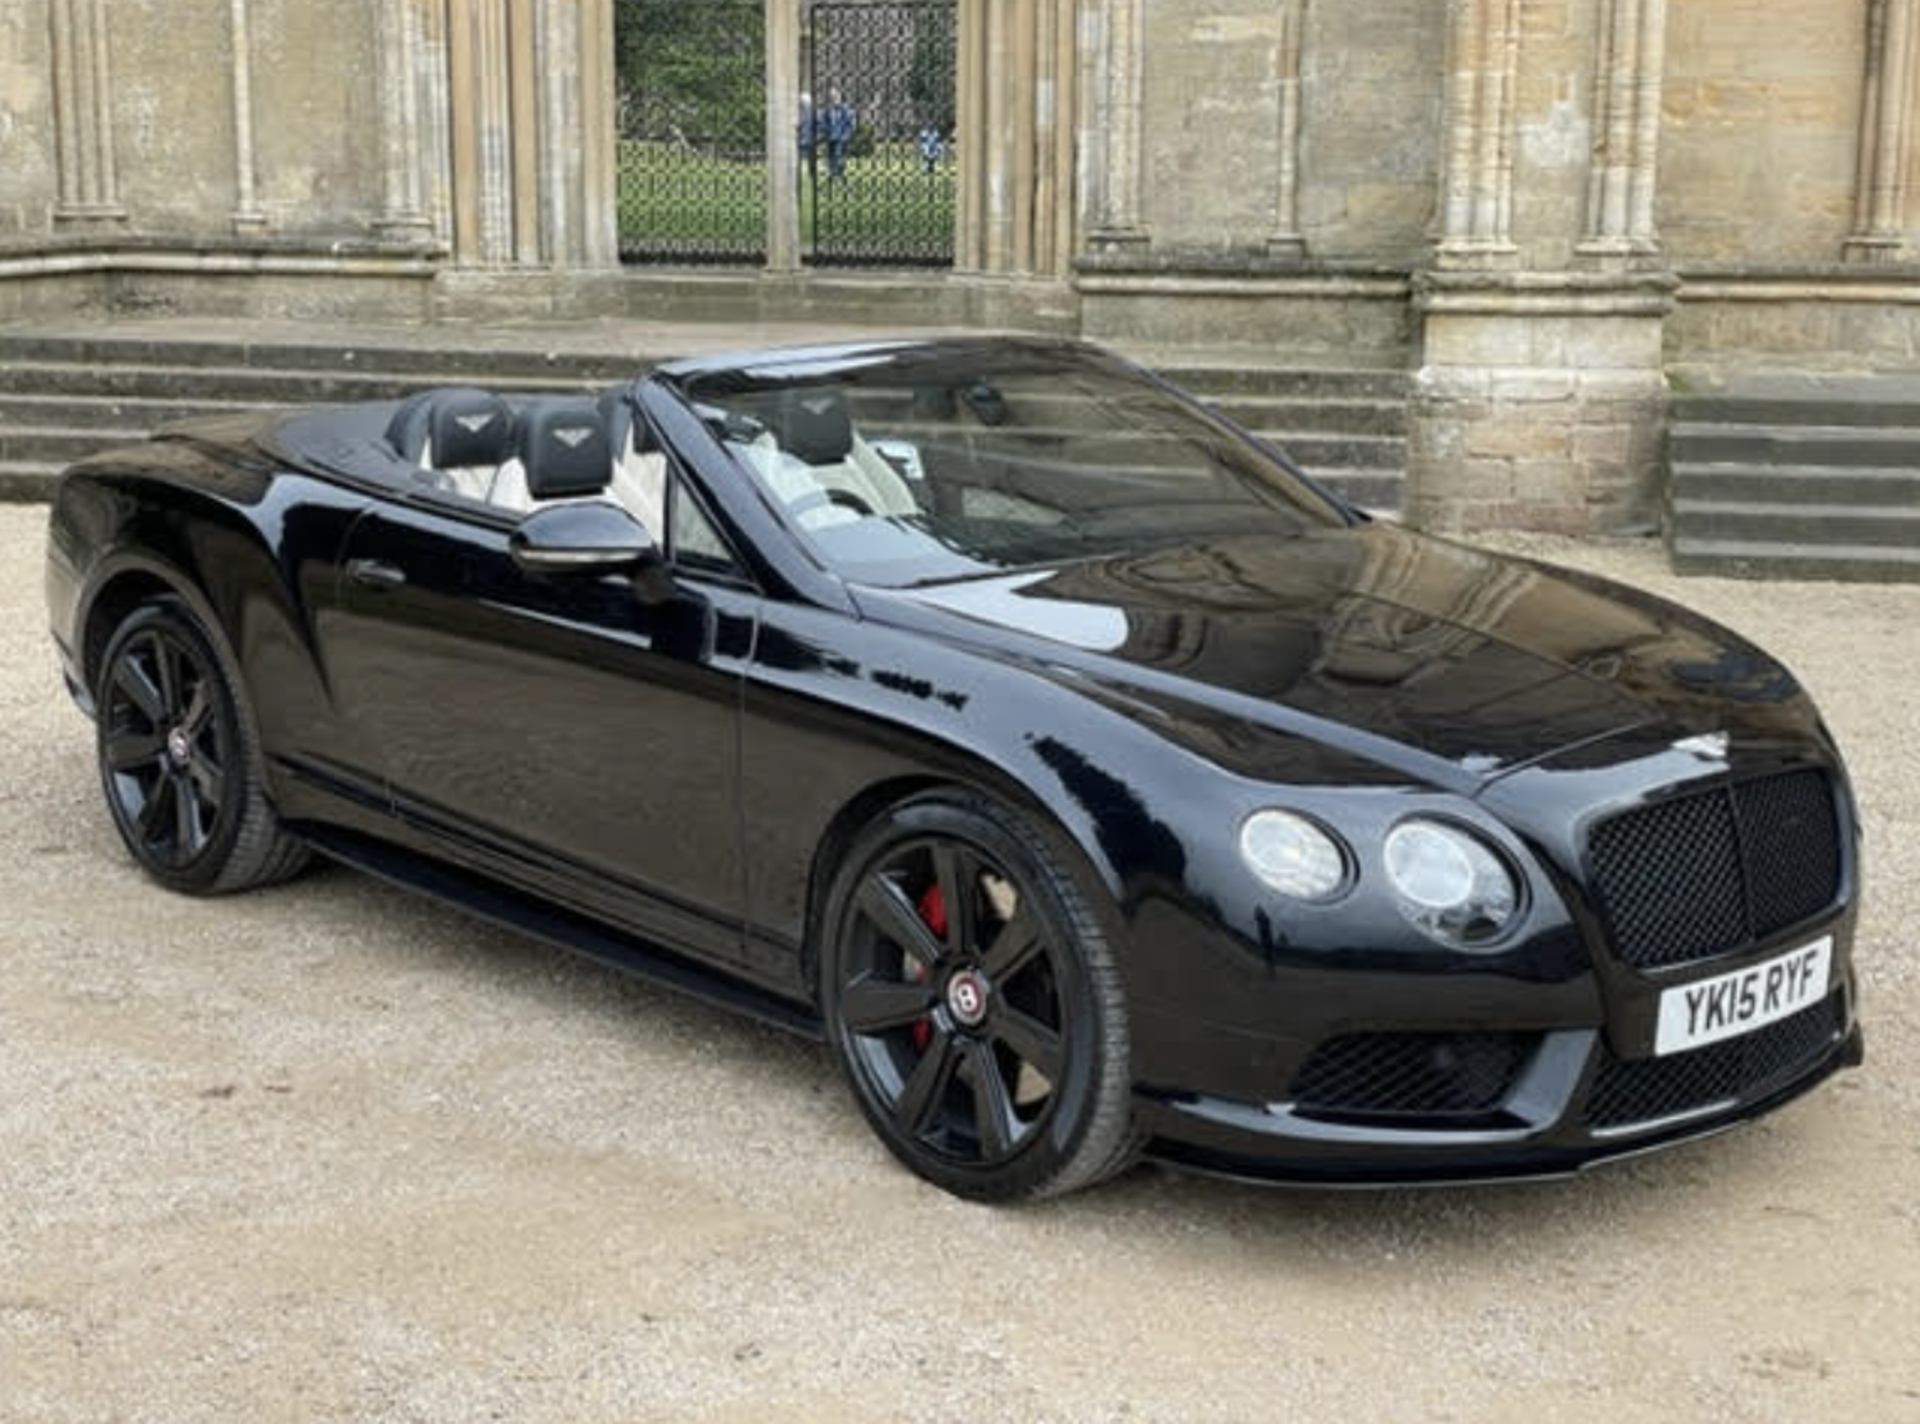 2015 Bentley Continental GTC 4.0 V8 S 2dr Auto Concourse series - Black pack 58,000 miles Full S/H - Image 11 of 18